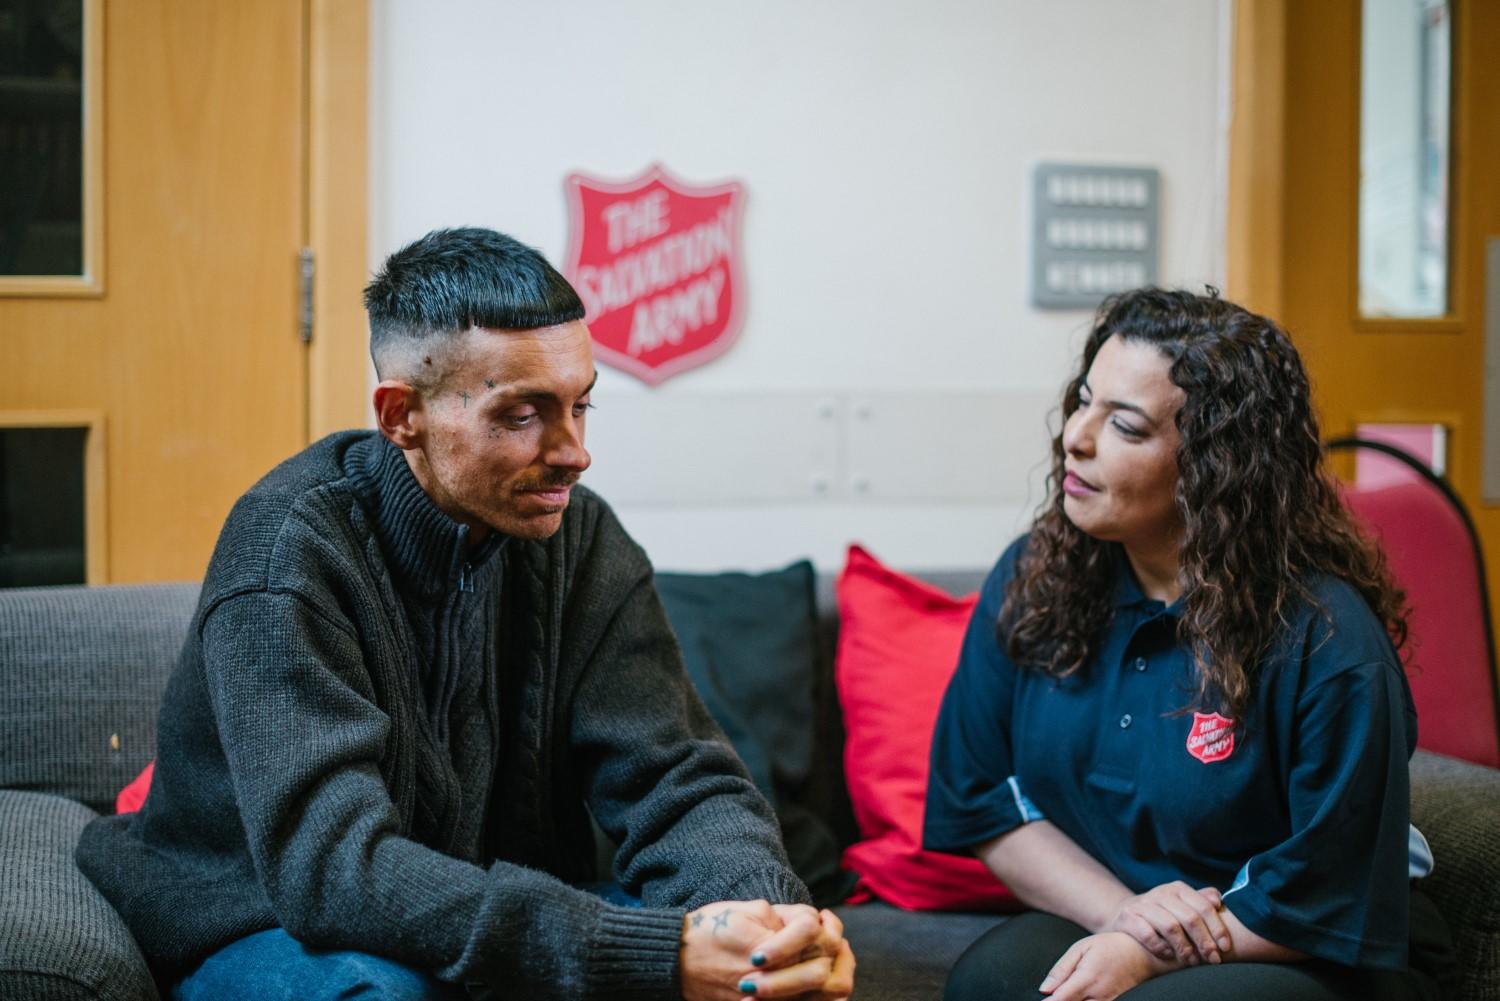 A Salvation Army volunteer/staff member talking with Max on a grey sofa inside a Salvation Army building.